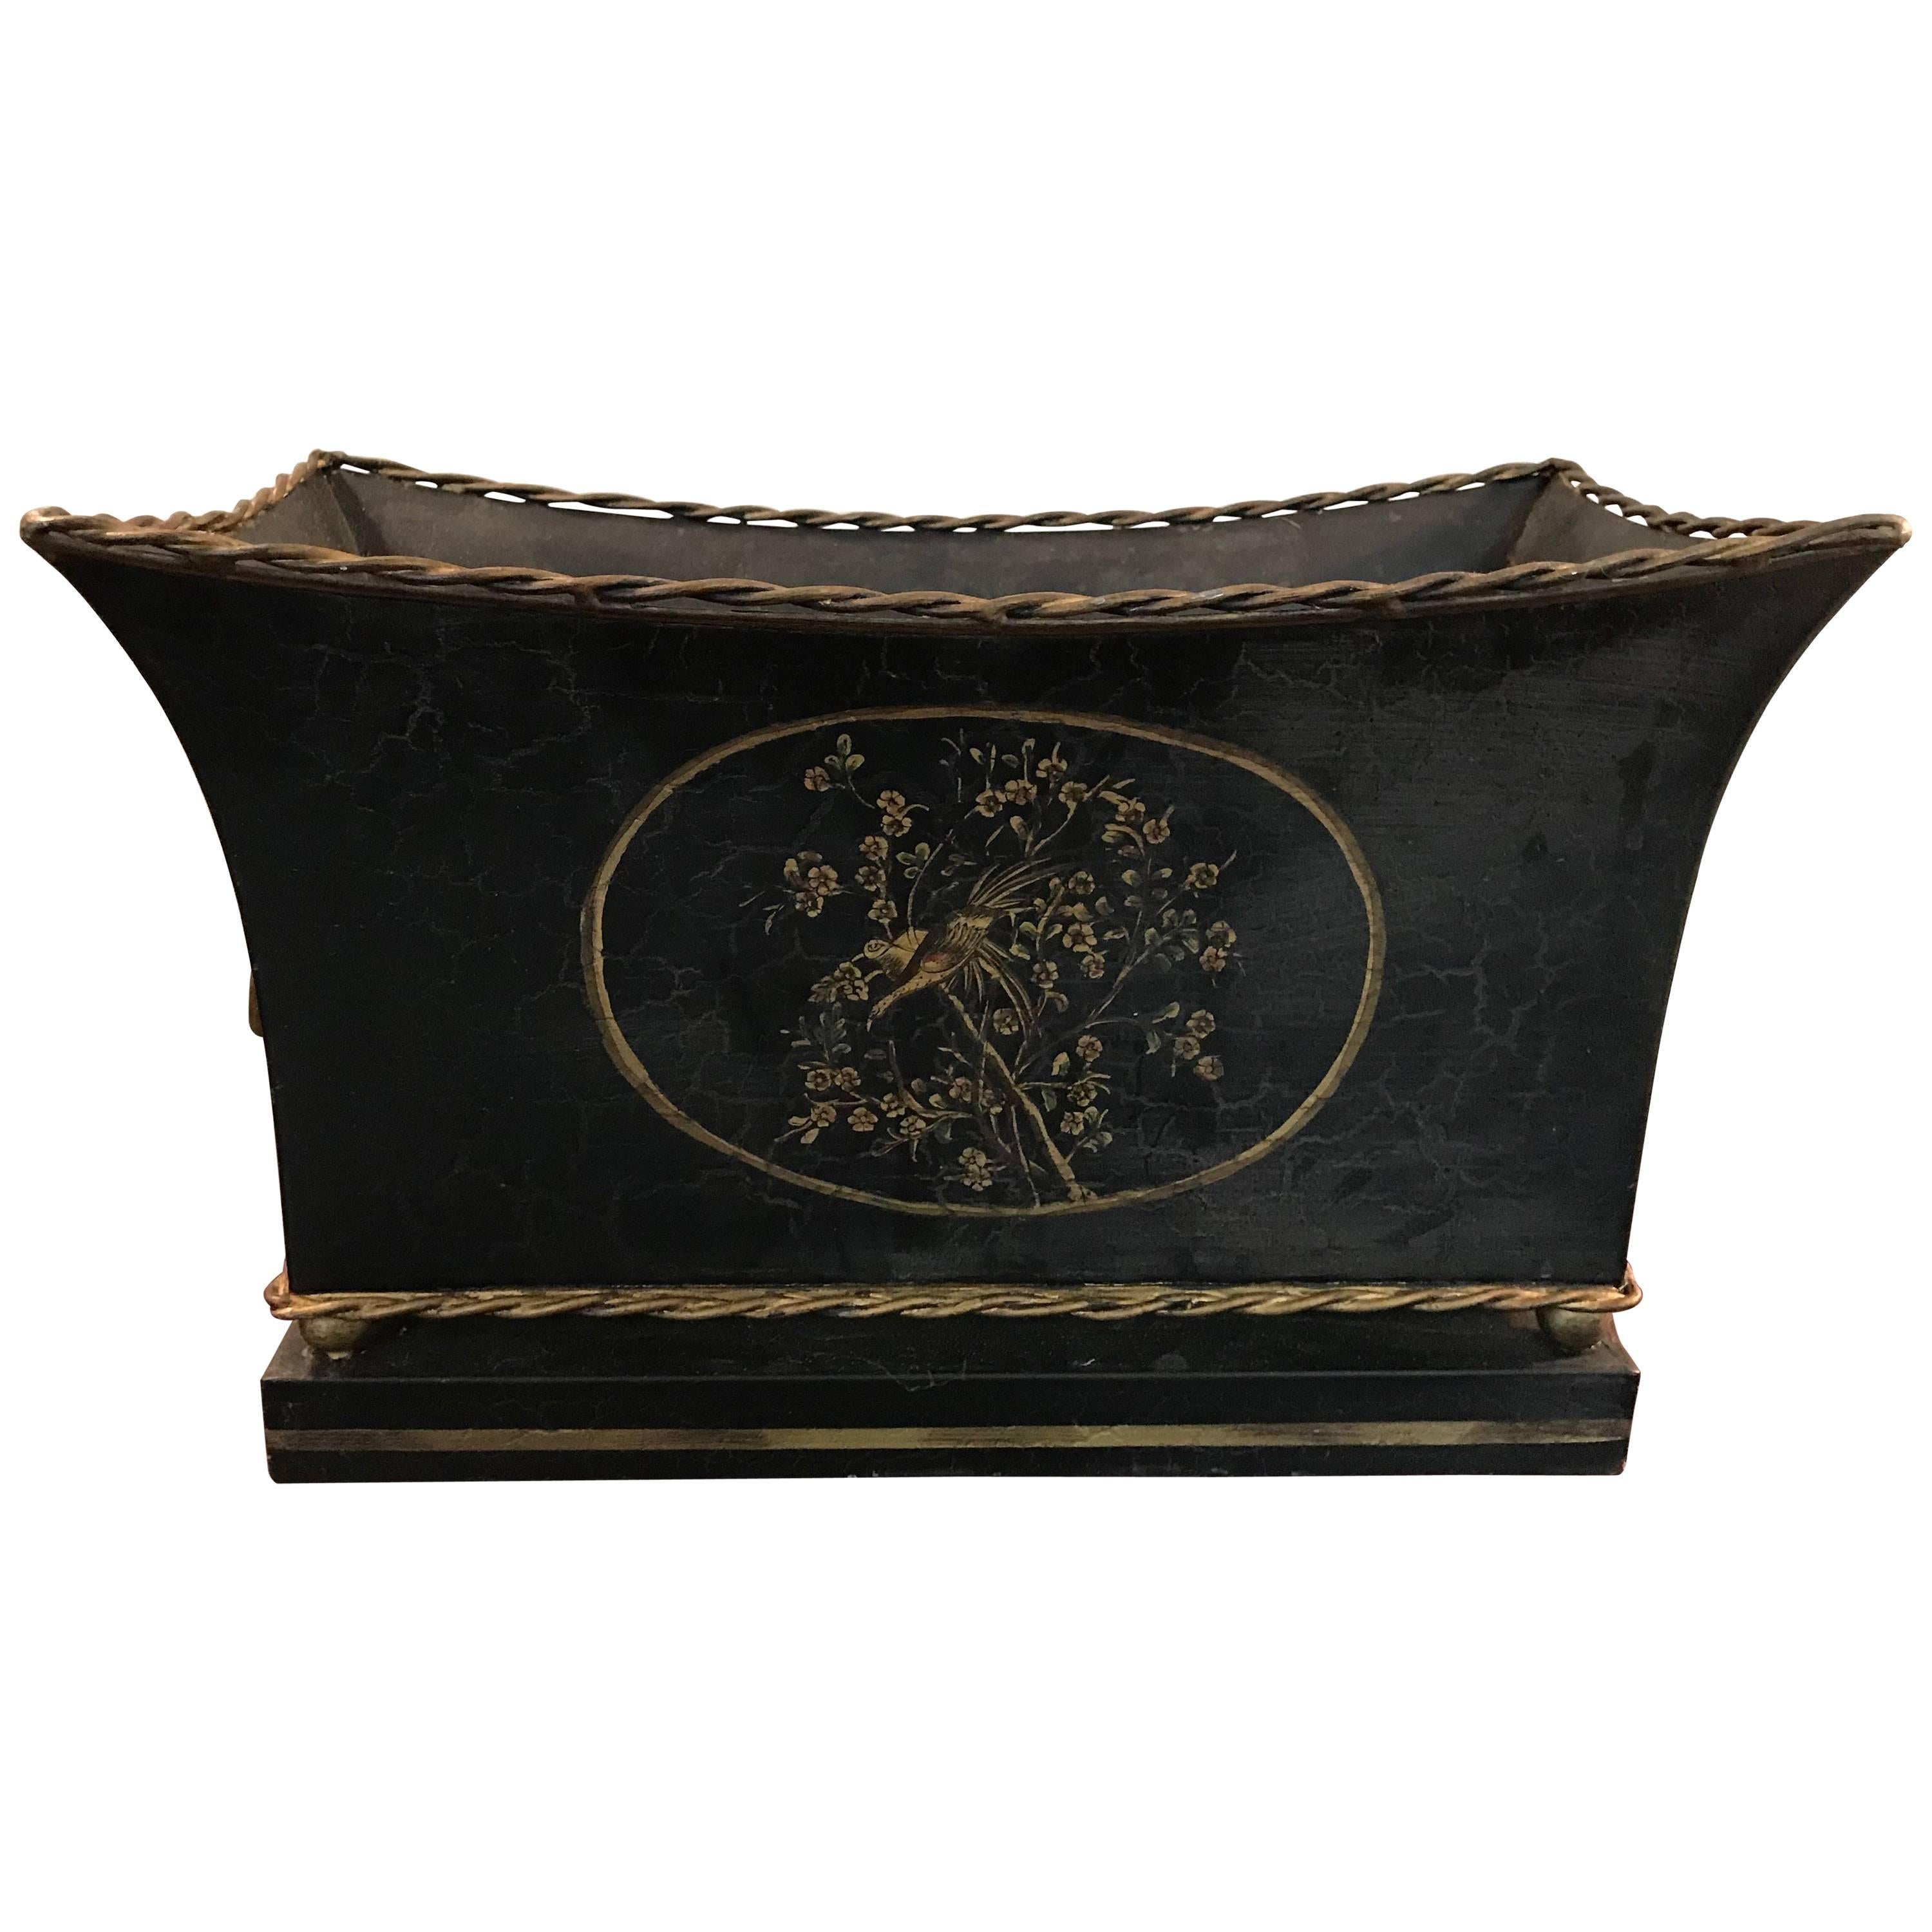 1970s Black and Gold Tole Cachepot with Floral Motif and Lion Head Handles